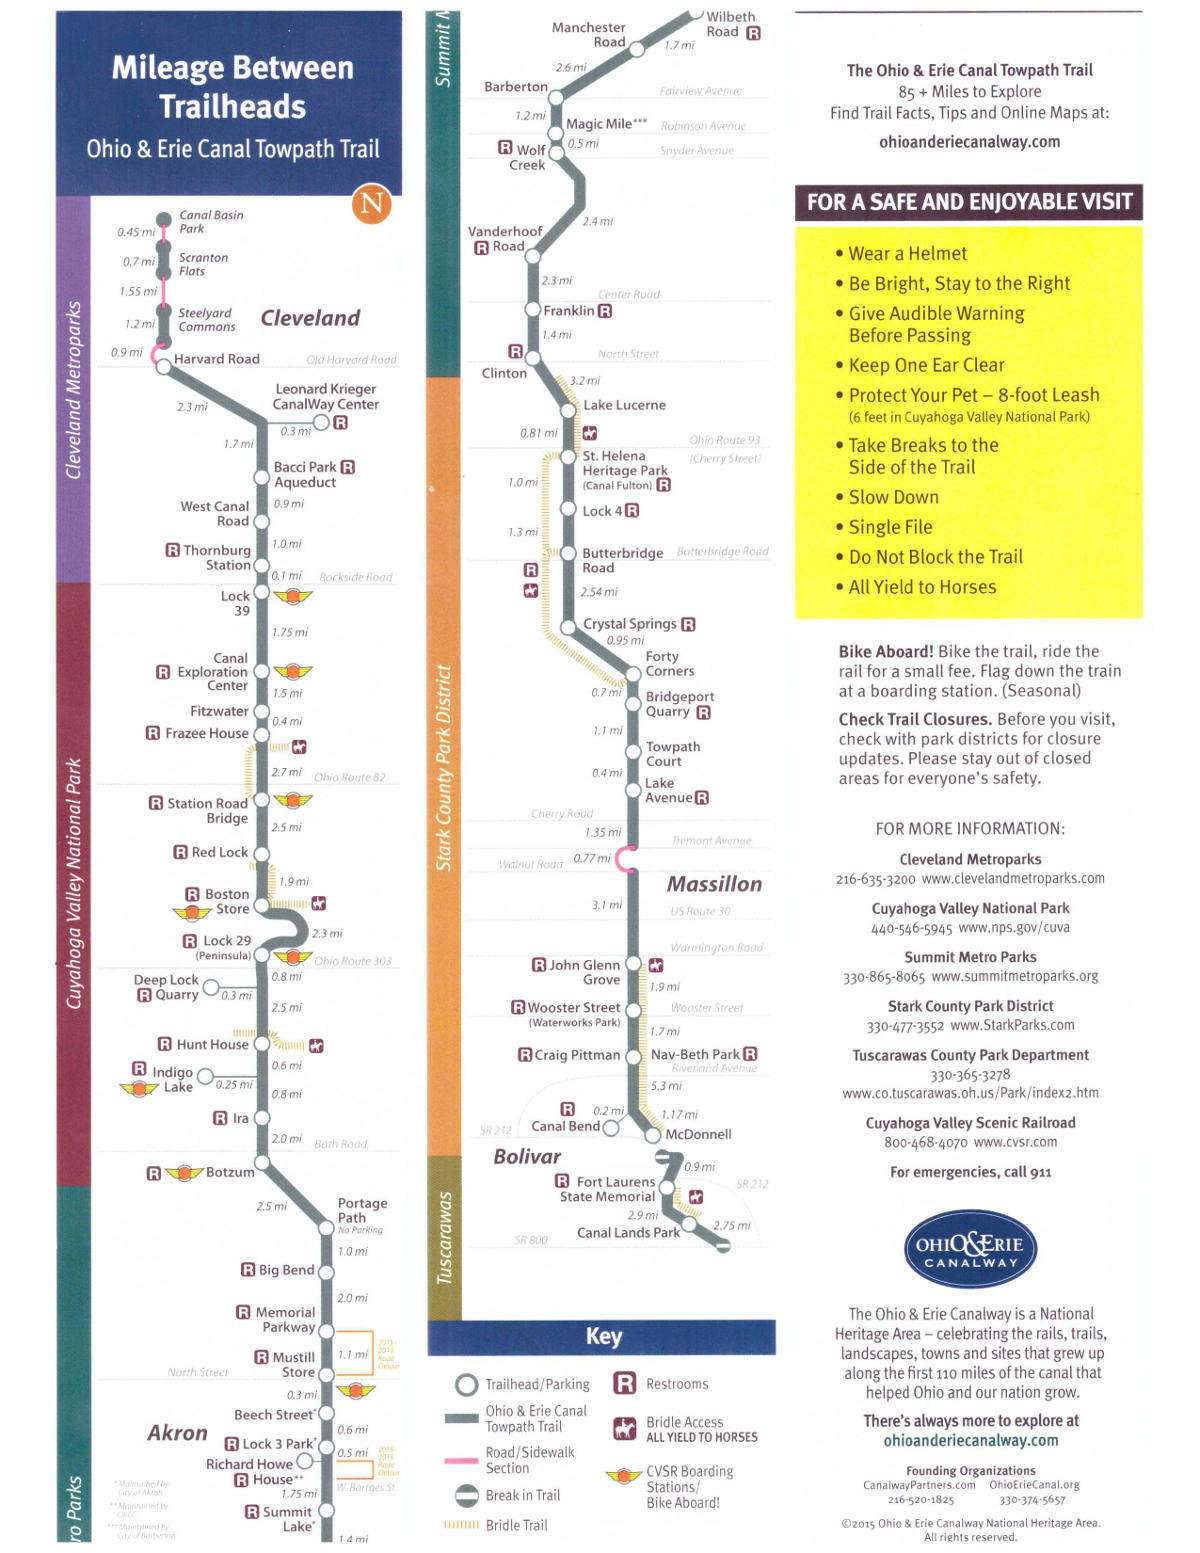 Towpath Trail Mileage Map & Safety Information